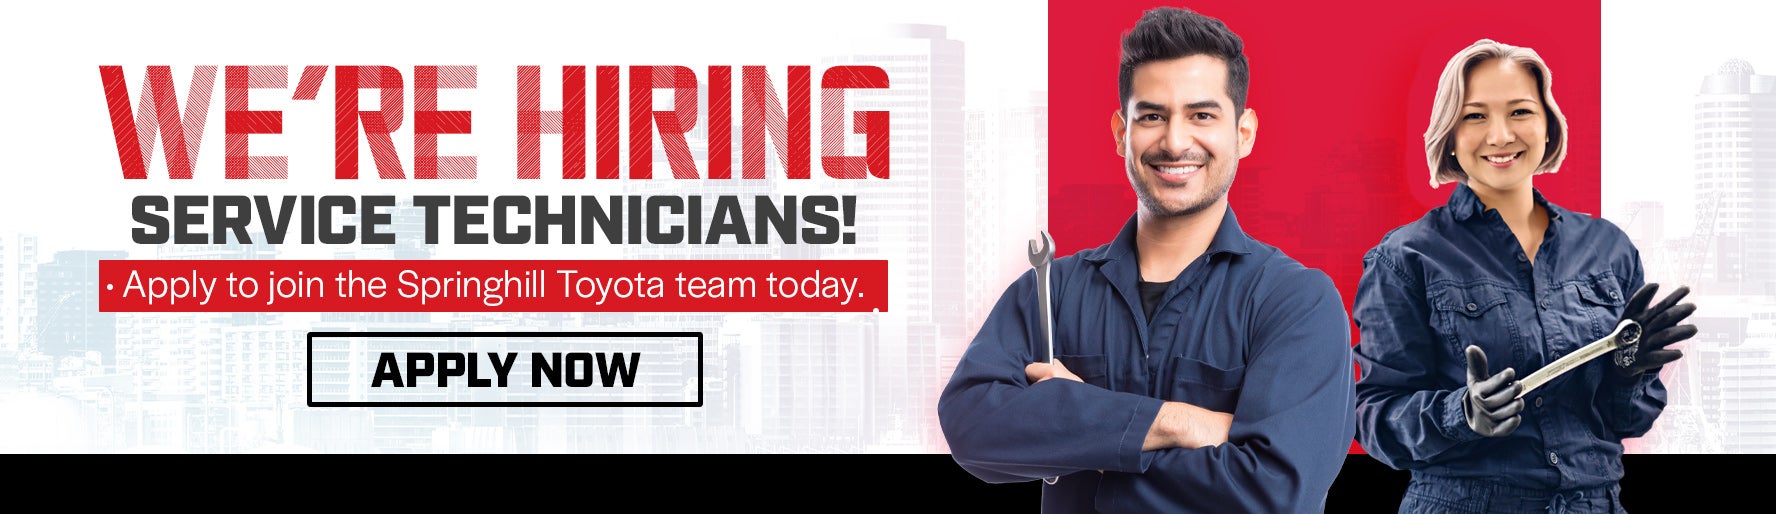 Apply to join the Springhill Toyota team today in Mobile, AL